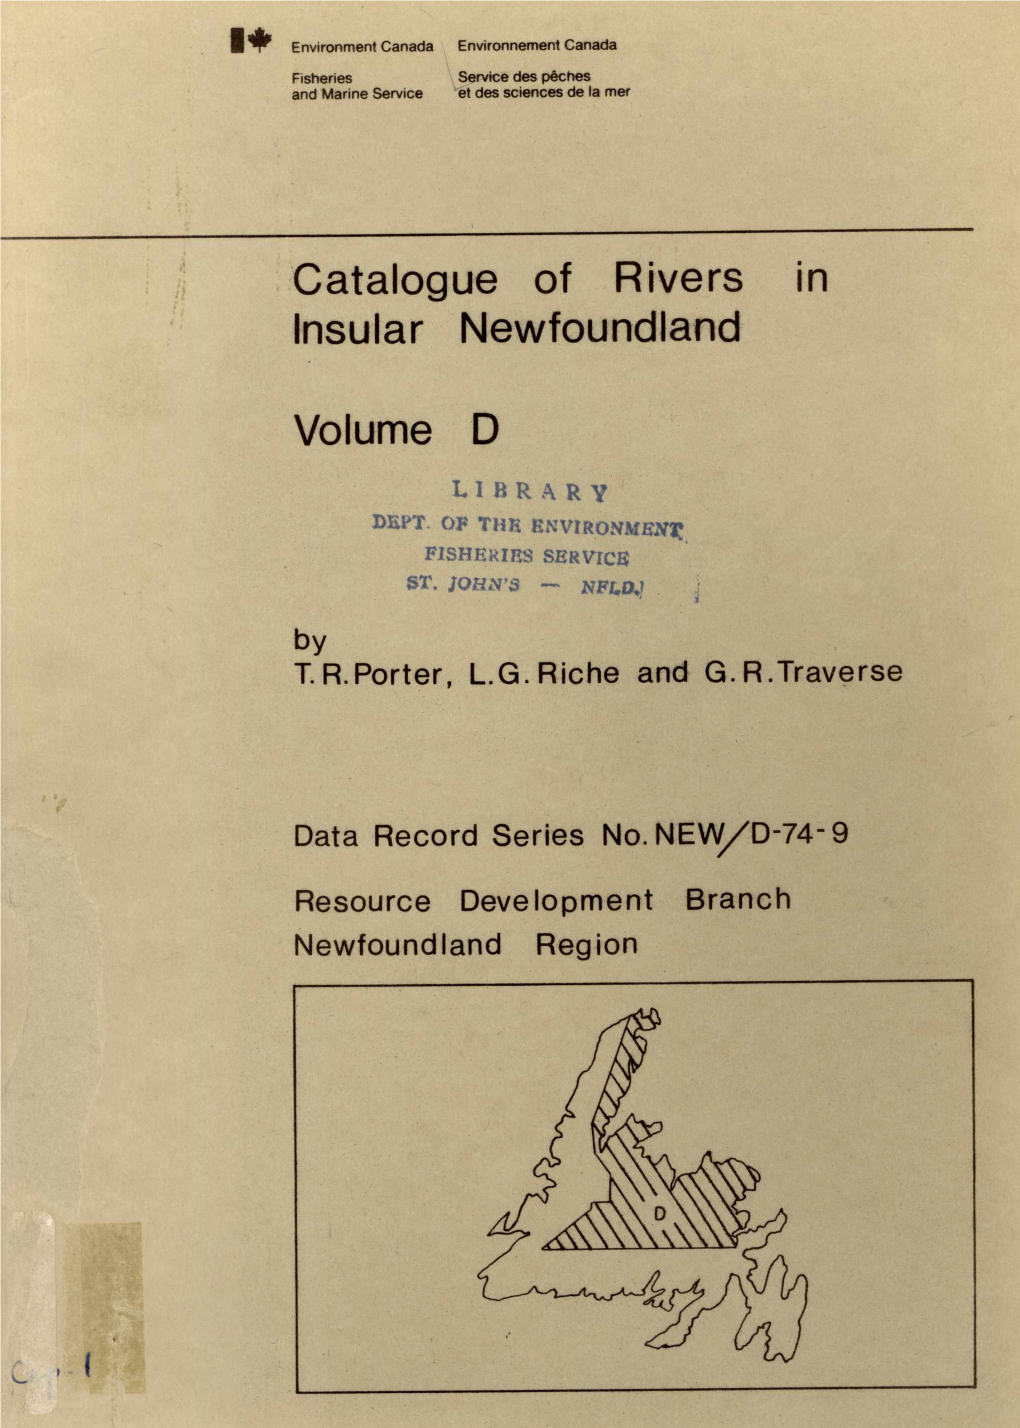 Catalogue of Rivers in Insular Newfoundland Volume D